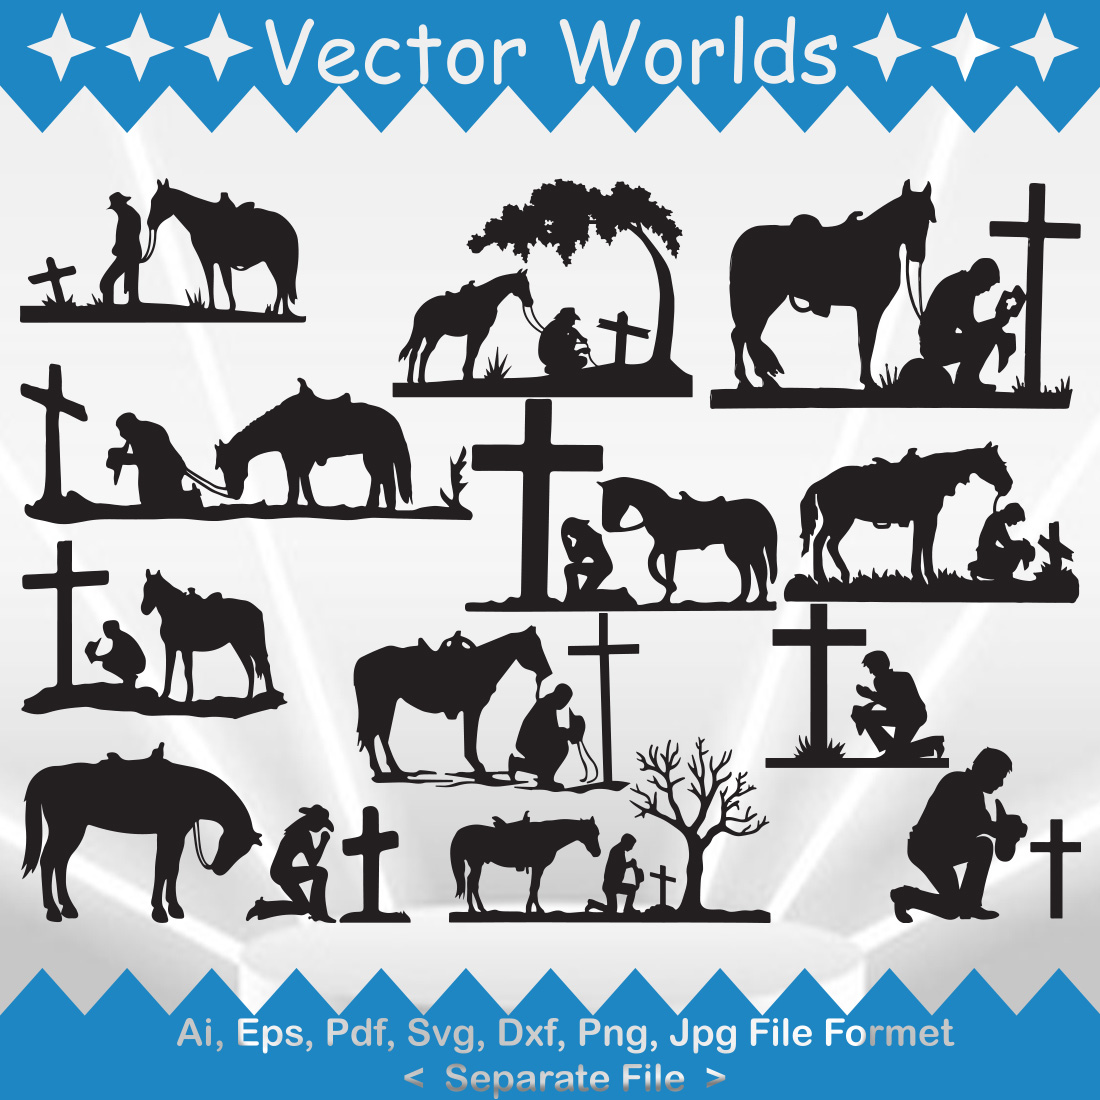 Set of silhouettes of people and animals.